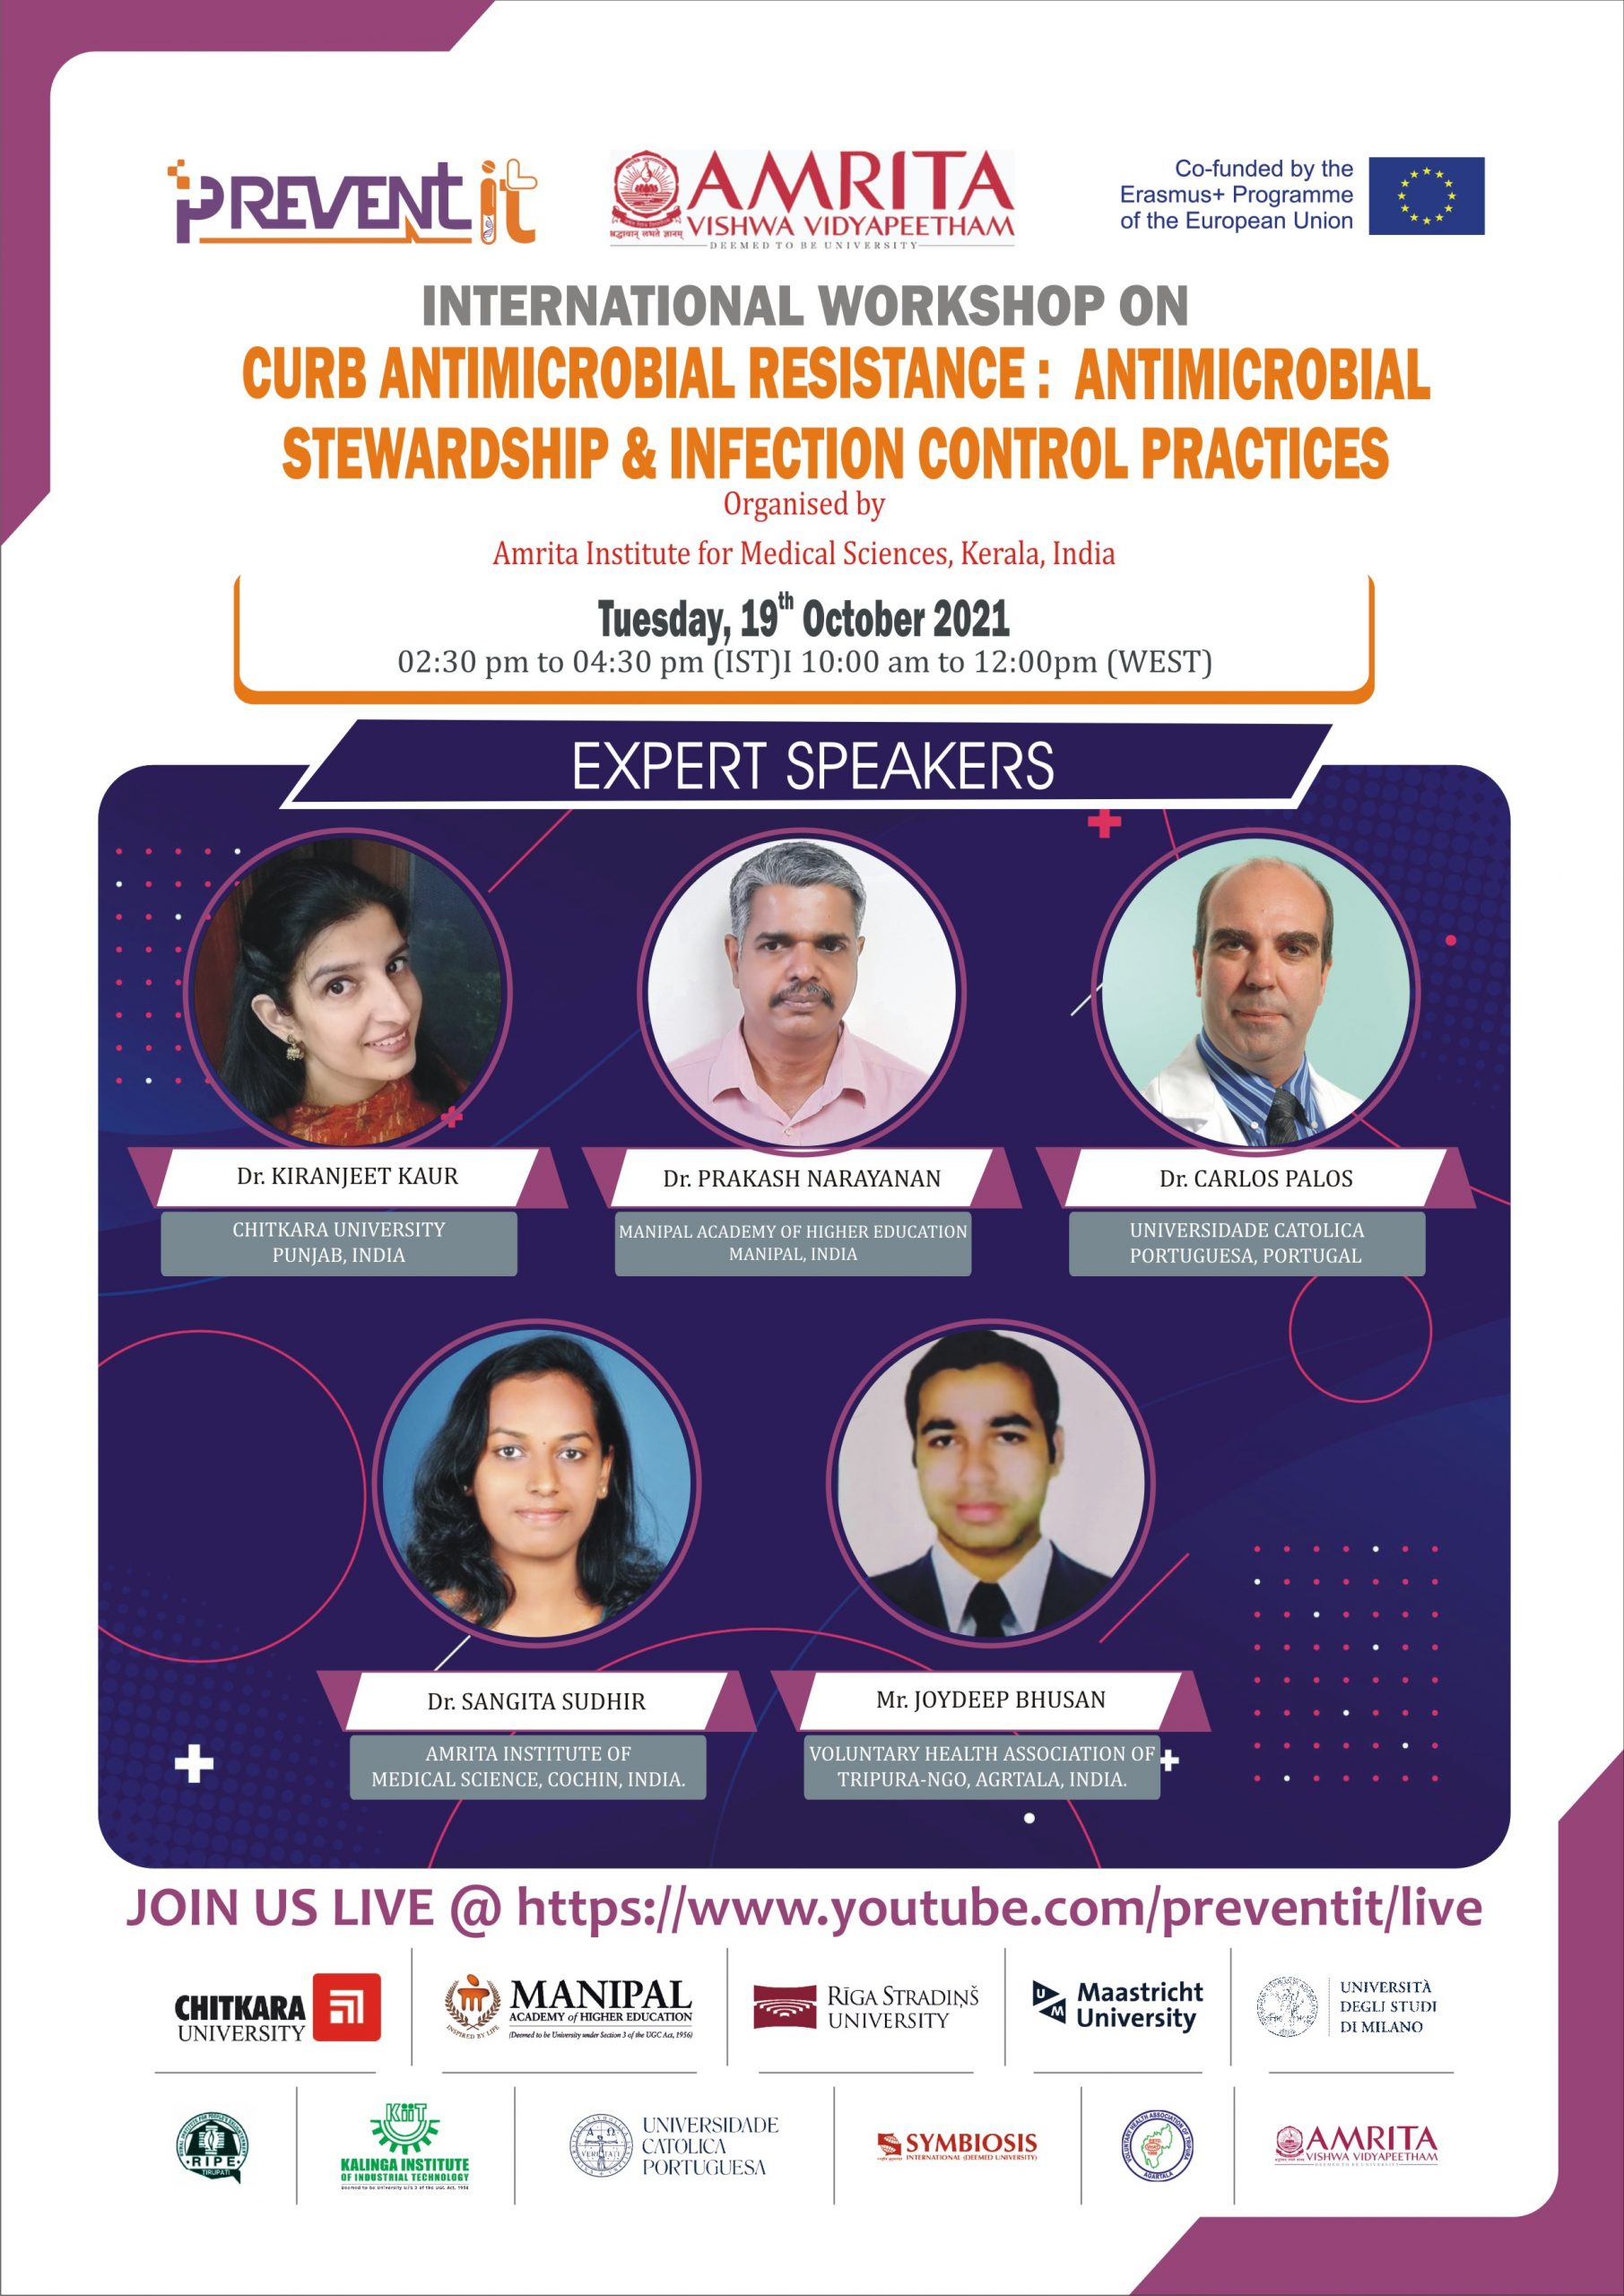 International Workshop on “Curb Antimicrobial Resistance: Antimicrobial Stewardship and Infection Control Practices” by Amrita Vishwa Vidyapeetham